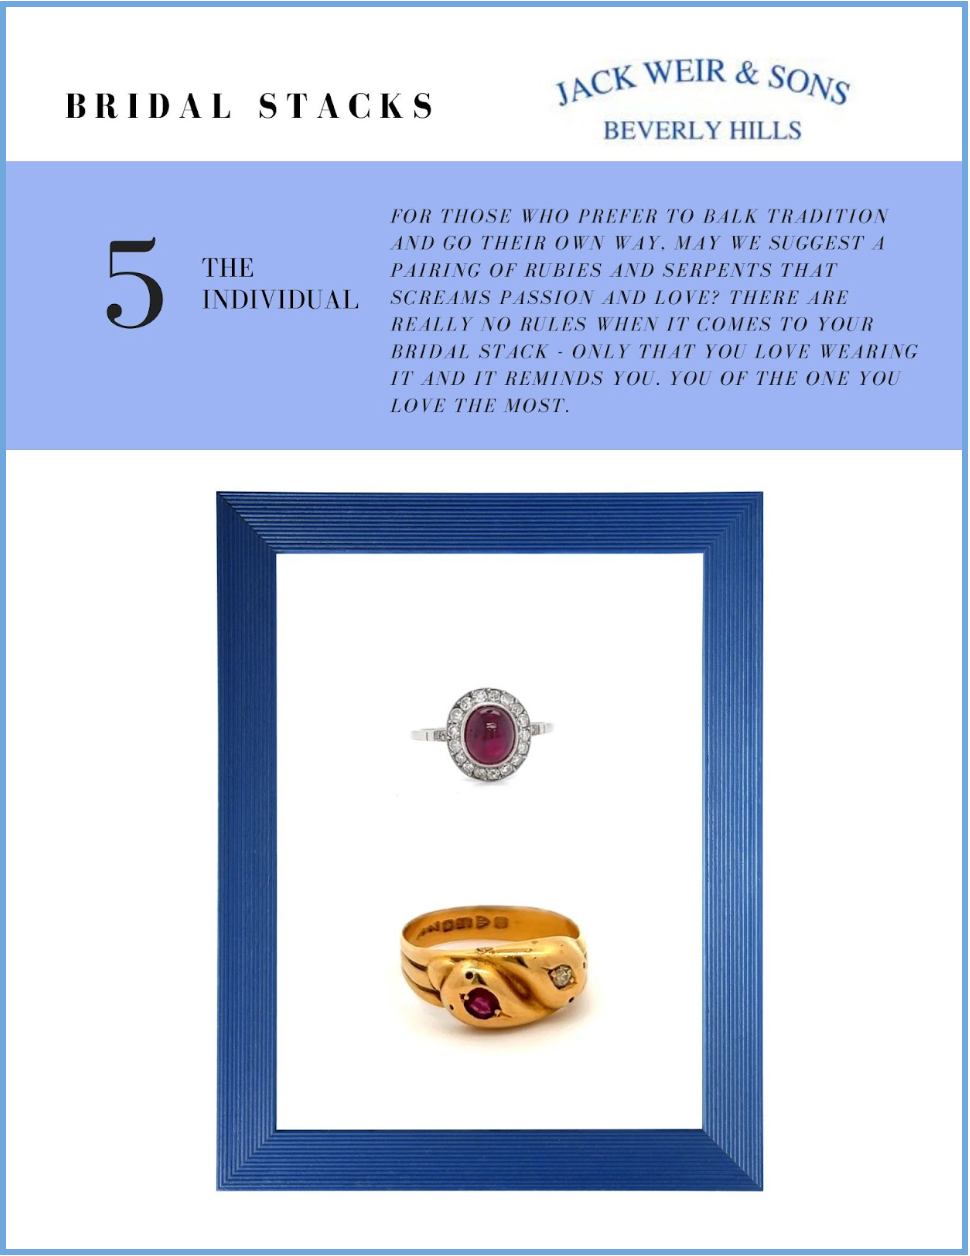 A Ruby and Diamond Ring and a wrapped panther ring sit on a white background with copy that discusses how you shouldn't let traditions dictate what you wear on your finger if you don't want to! 